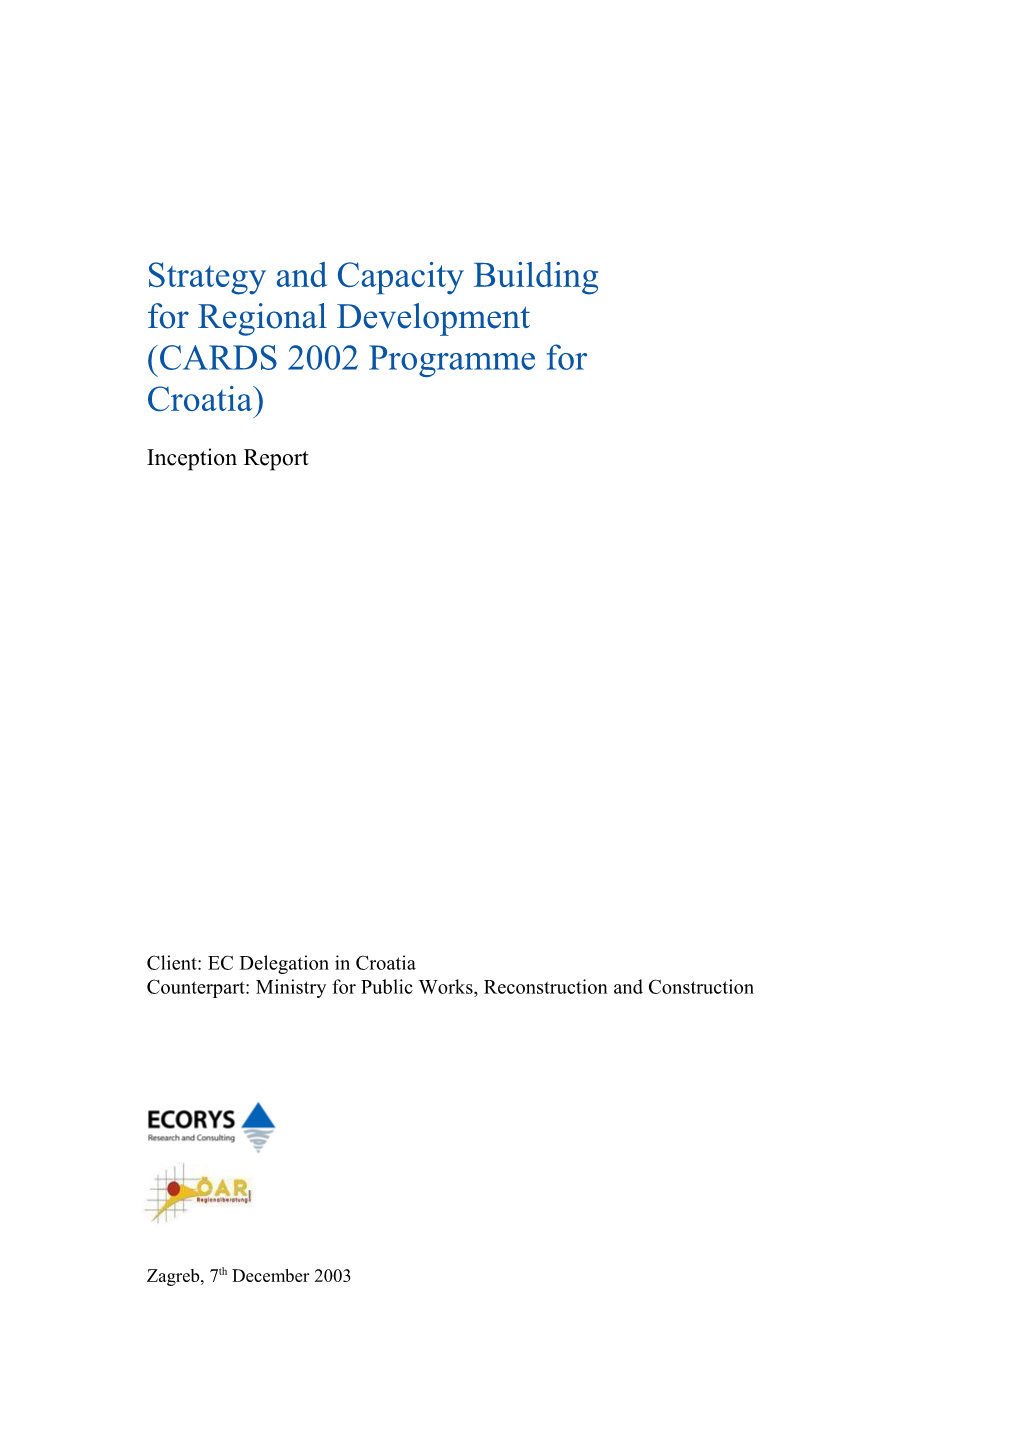 Strategy and Capacity Building for Regional Development (CARDS 2002 Programme for Croatia)